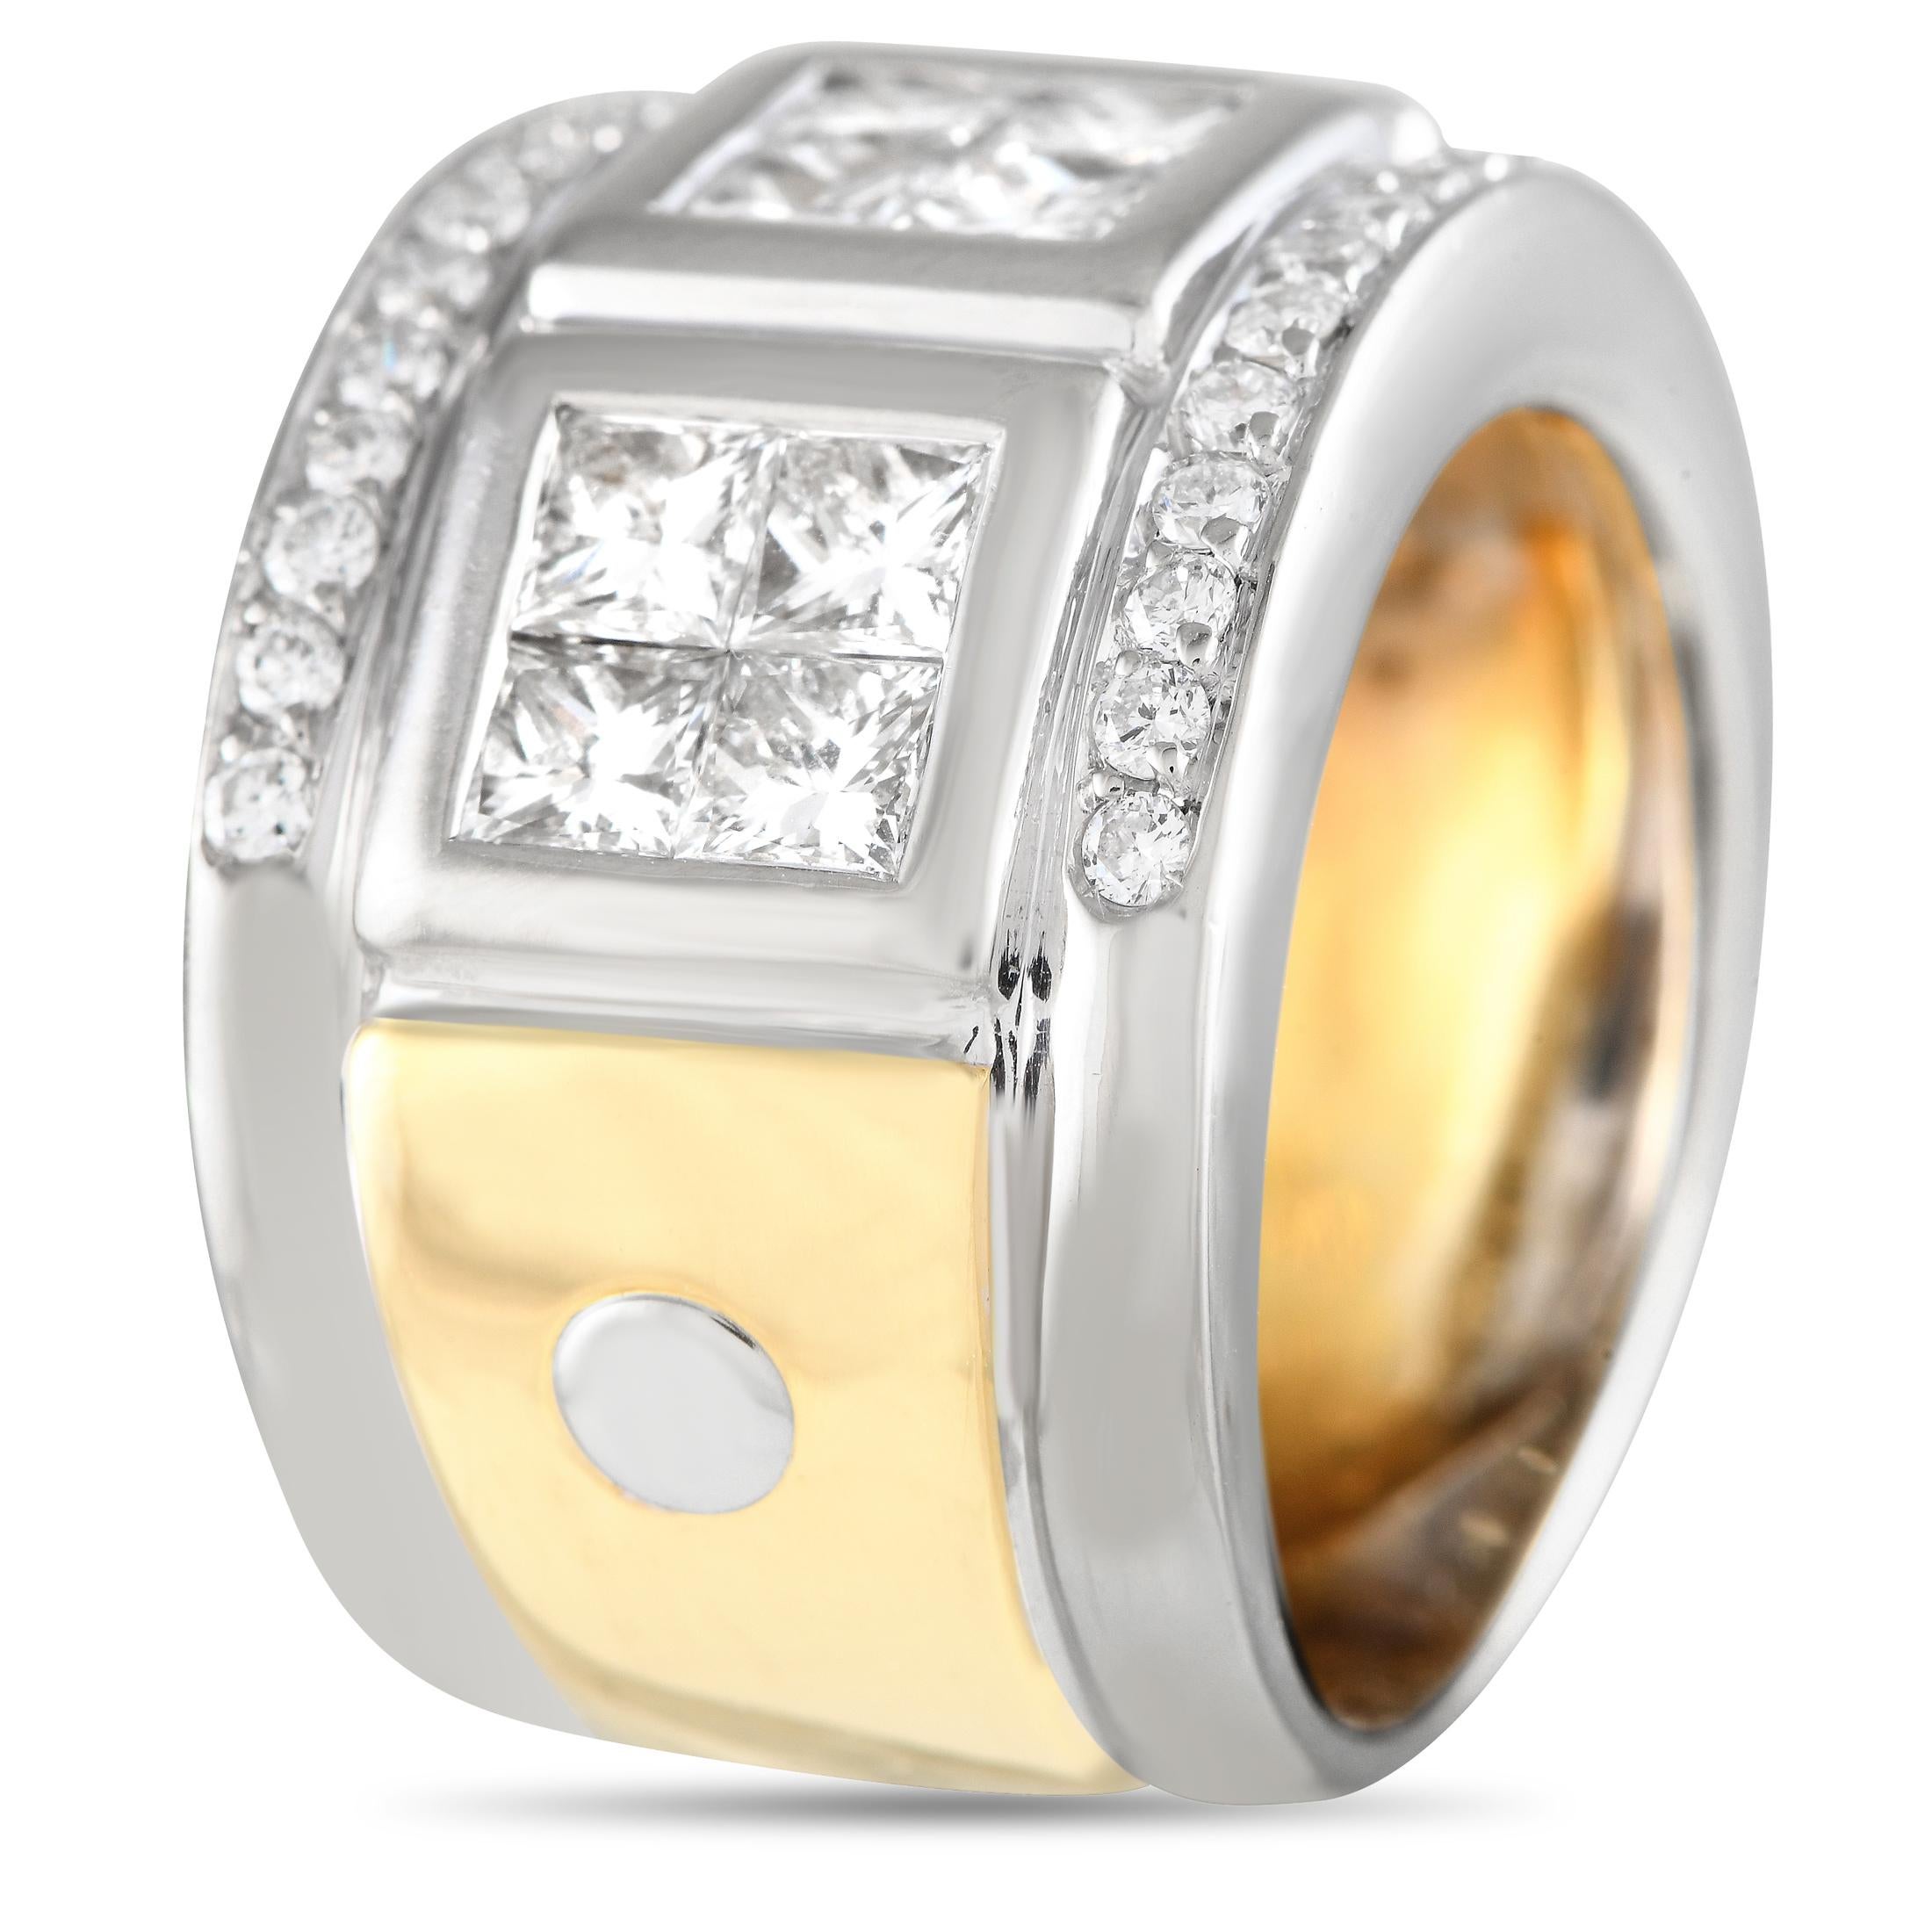 Circle gets the square in this LB Exclusive piece. A 13mm-thick two-toned band is dressed with three square frames filled with four square-cut diamonds. Round diamonds trace the ring's top edges for added shine. The ring's top dimensions measure